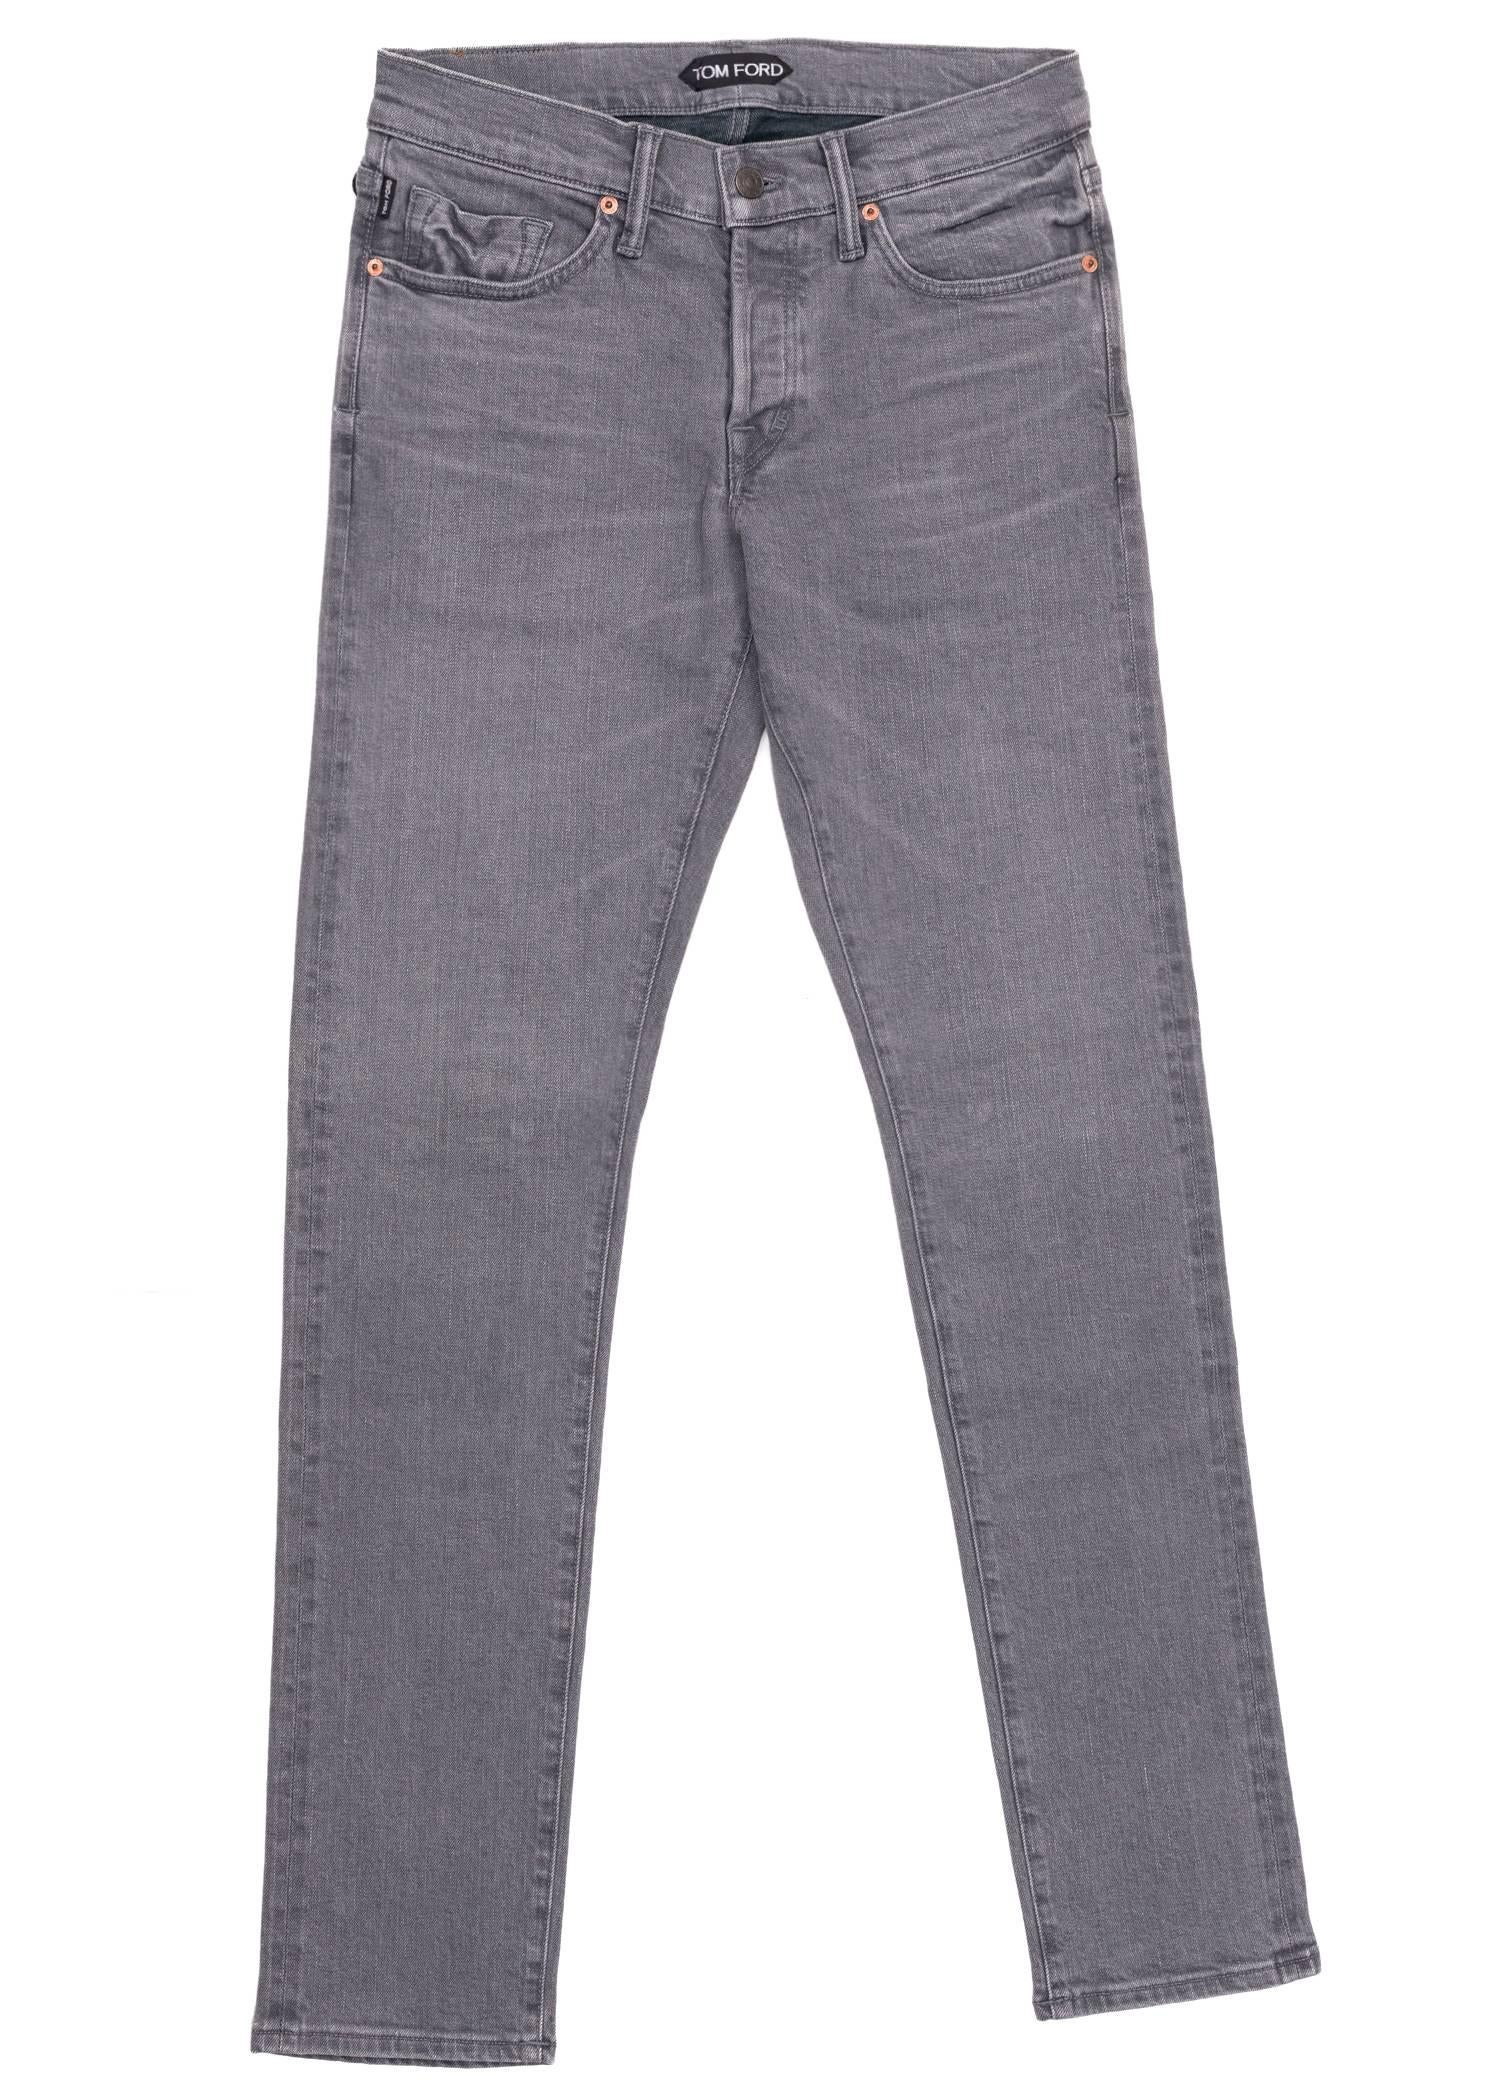 Take a stroll in your medium wash Tom Ford Selvedge Jeans. This durable pair was designed using firm aerated cotton, a slim fit, and a four button front fly design. Pair these jeans with a relaxed top for the perfect all casual look.

 ​​​​New with